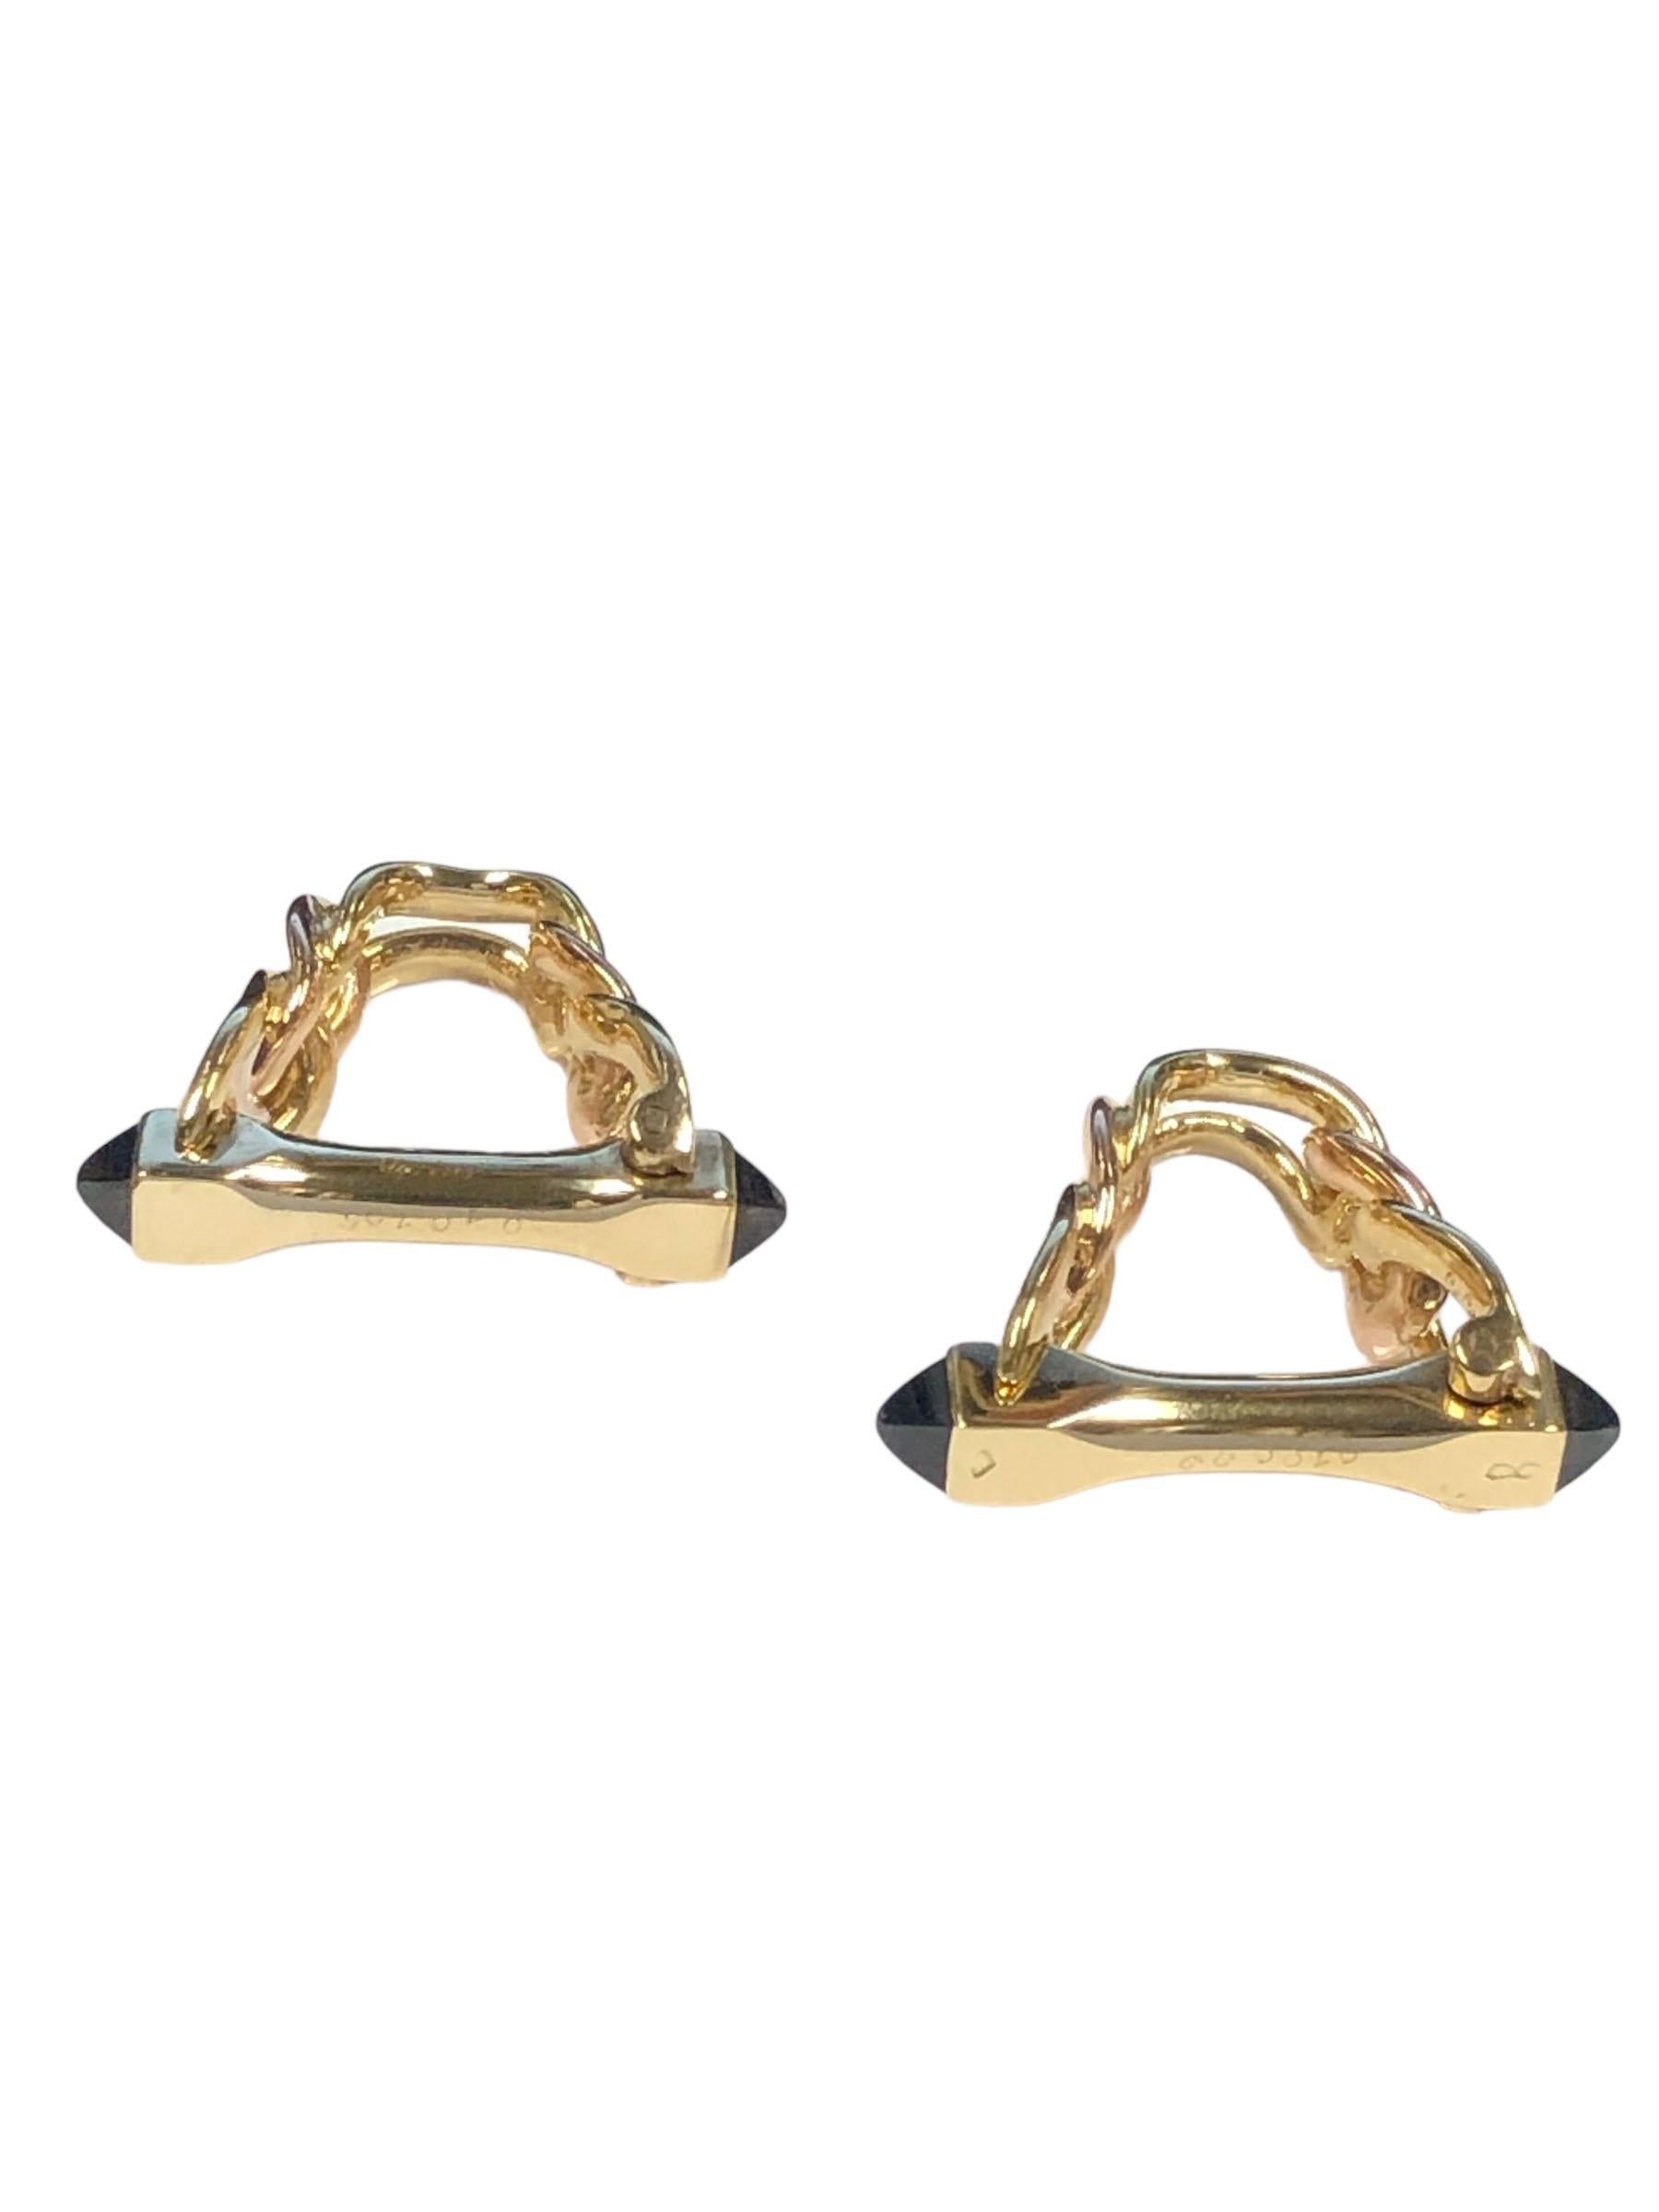 Circa 1960 - 1970 Cartier Paris 18k Yellow Gold Stirrup Cufflinks. measuring 1 inch in length X 1 inch, having a solid link design and set with Pyramid shape Cabochon Sapphires, Signed and Numbered. These are well designed for easy self on and off. 